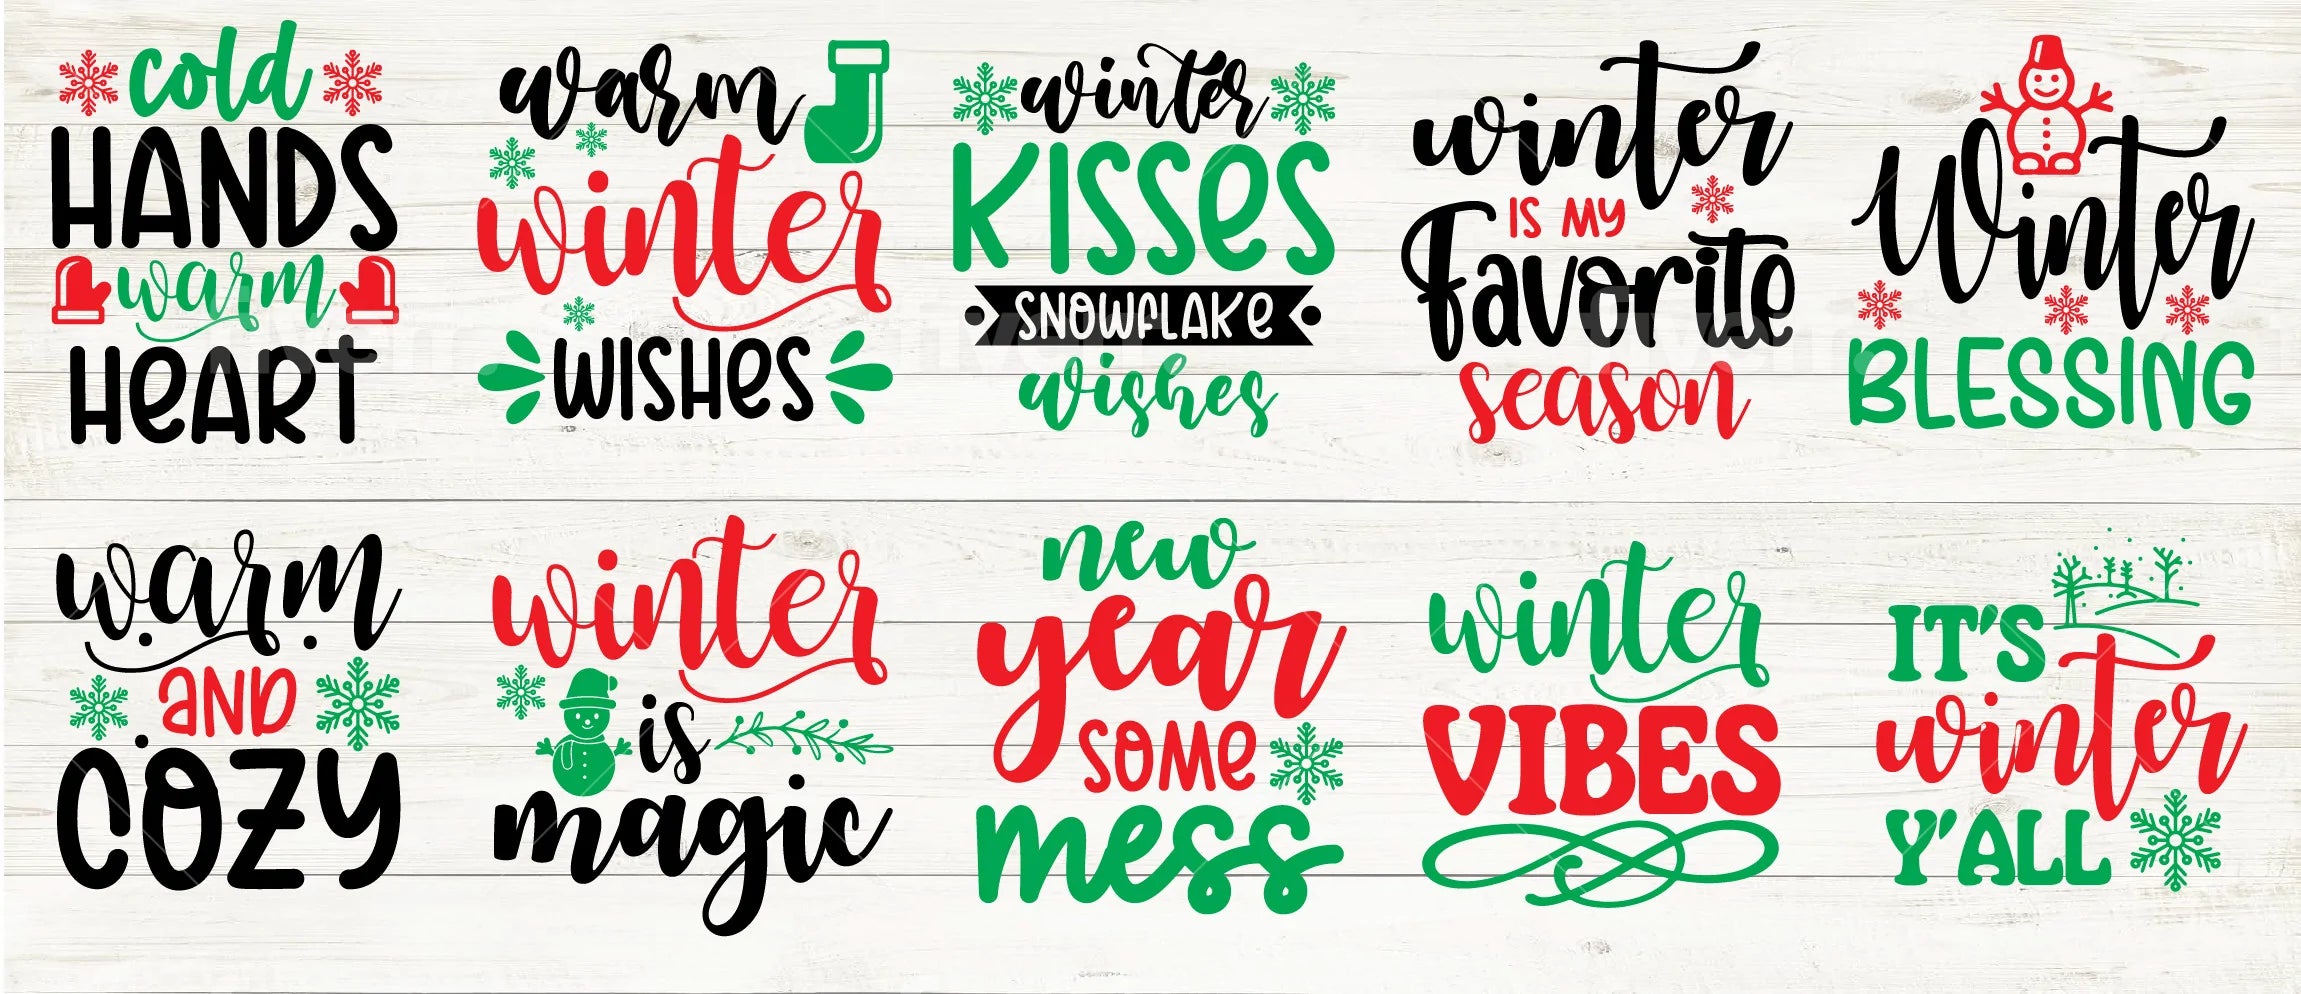 50 Let it Show, Winter tote, Sweatshirt and so much more SVG Bundle